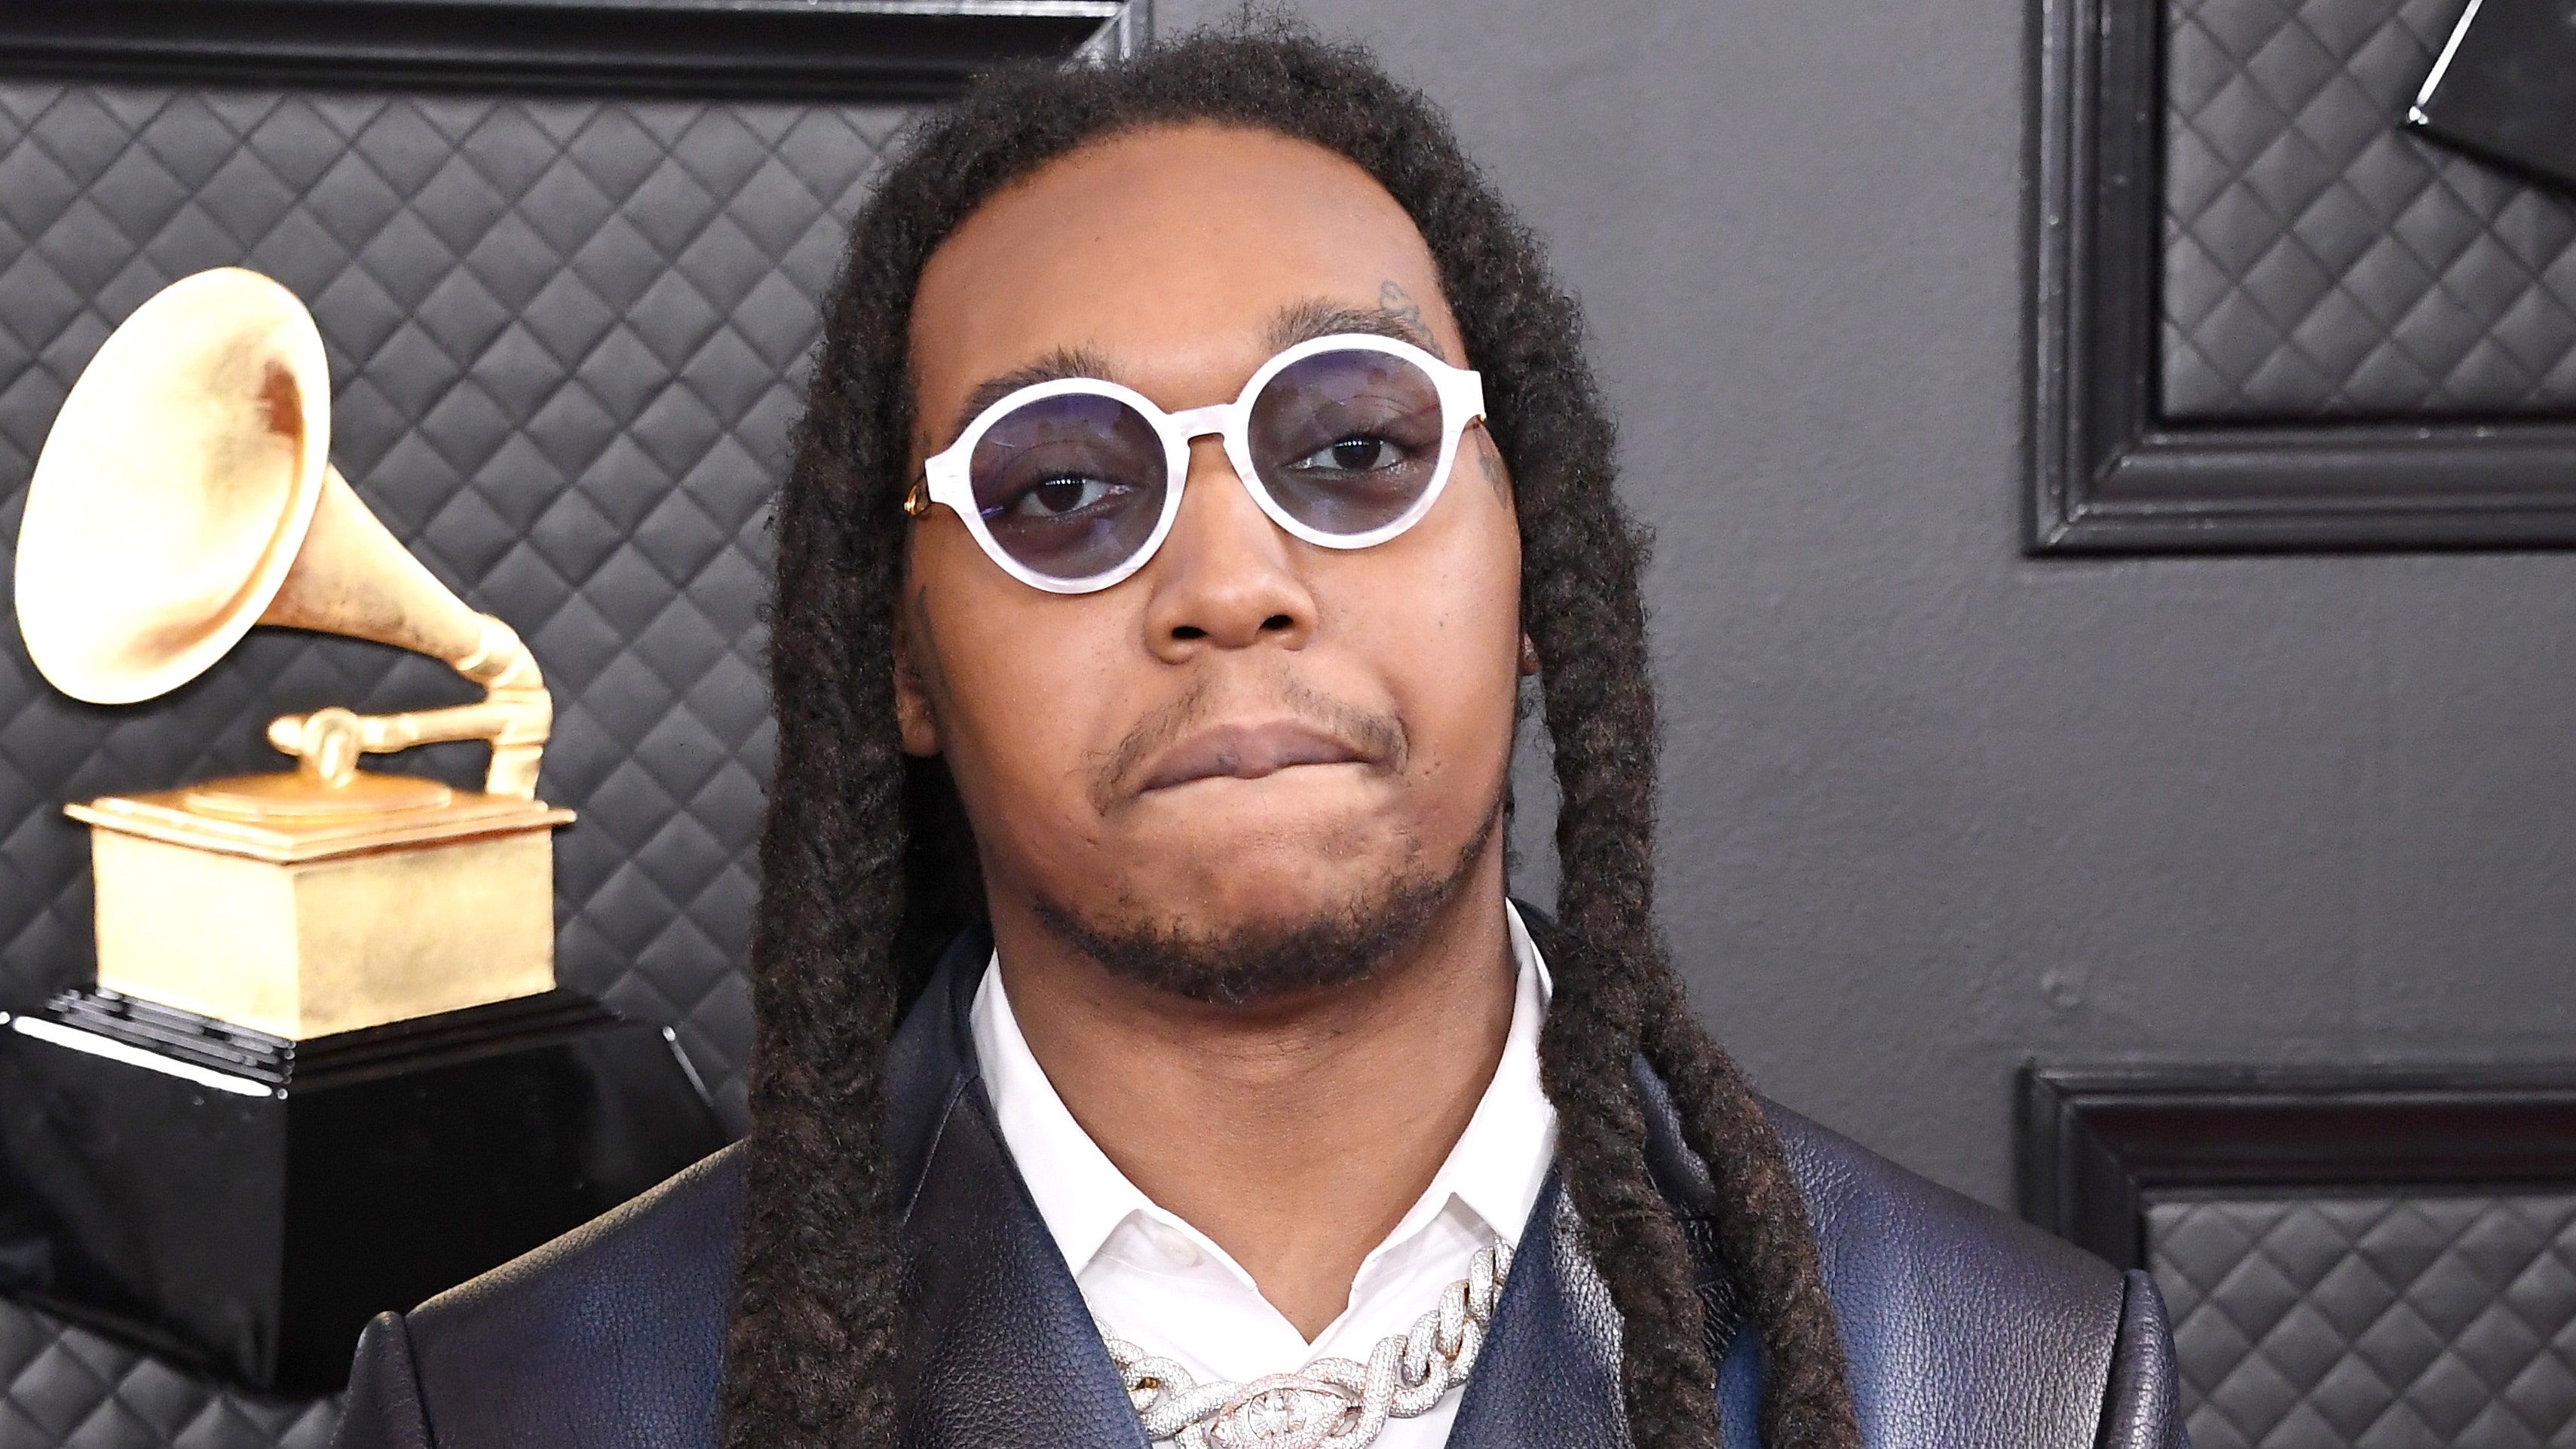 Takeoff, Quavo of rap group Migos attended Houston party where shooting left 1 dead: report